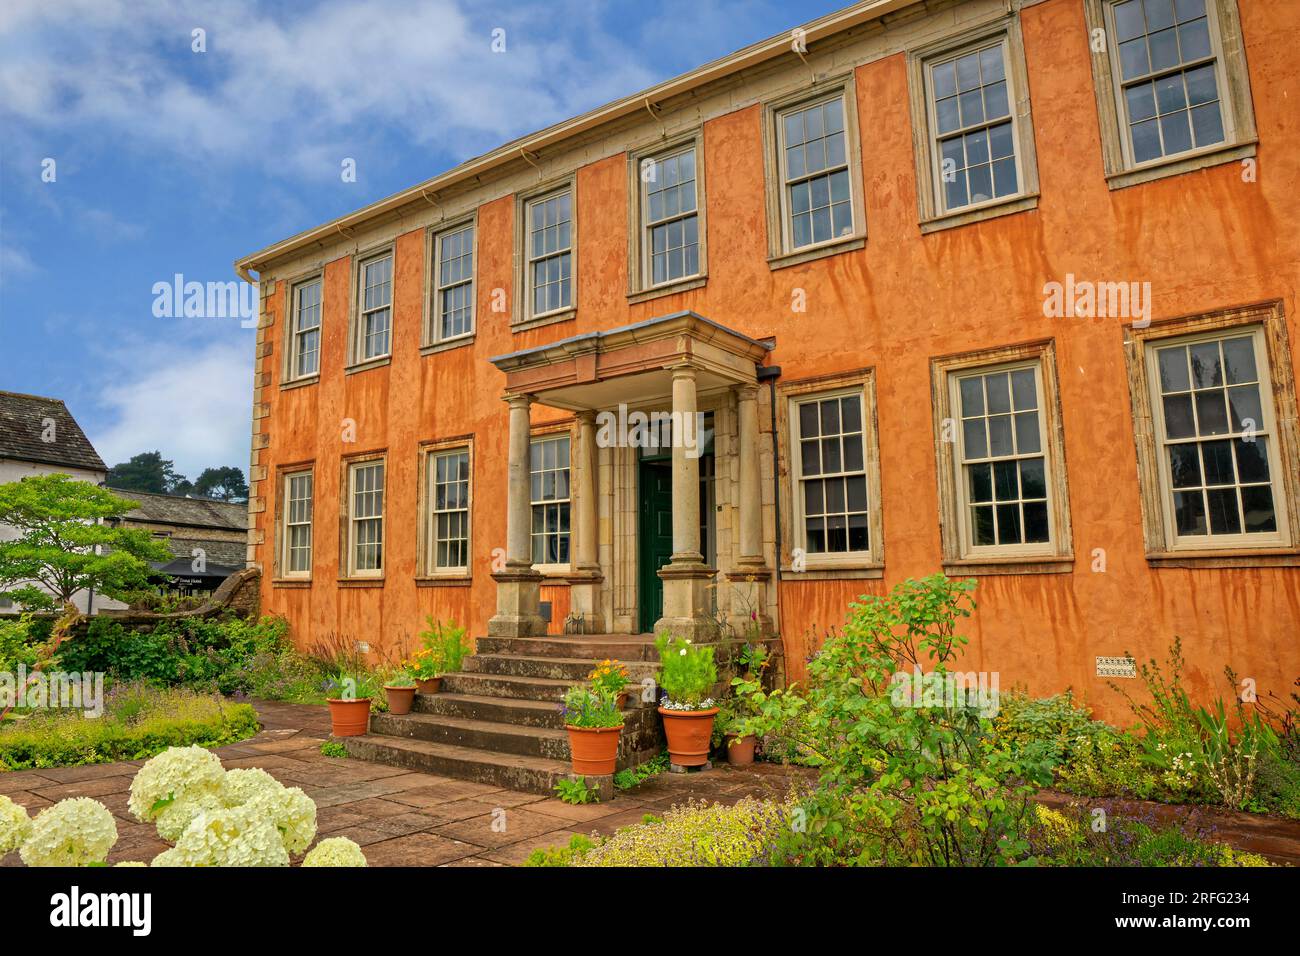 Wordsworth House, birthplace of poet William Wordsworth at Cockermouth in Cumbria, England. Stock Photo